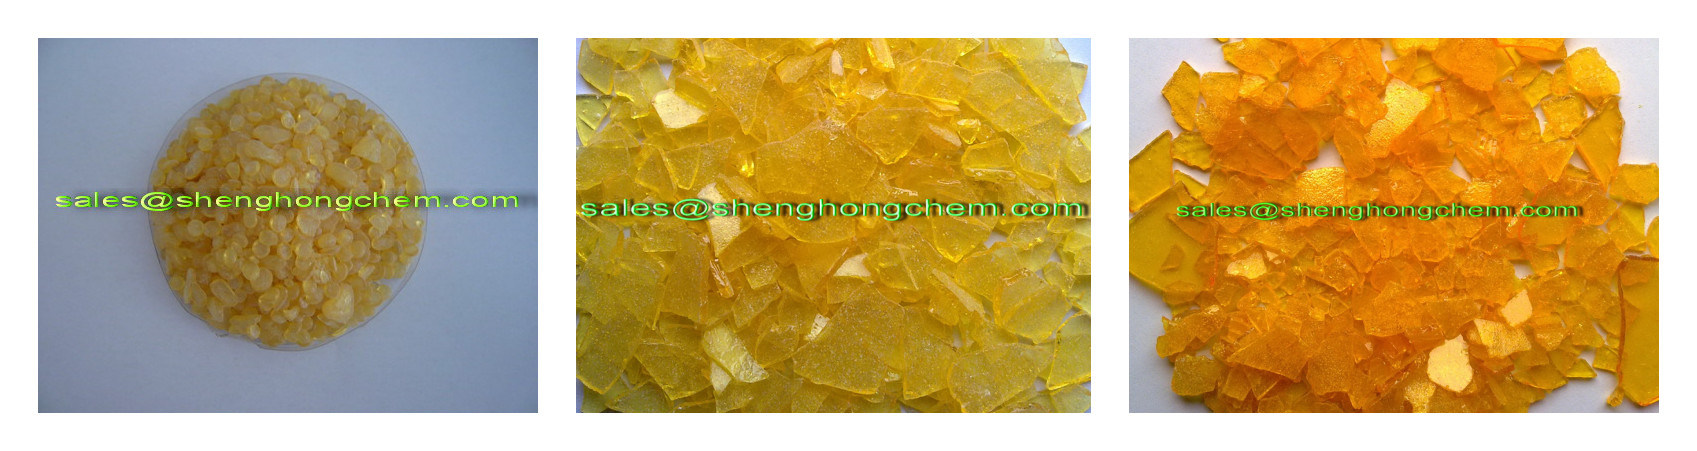 C9 Aromatic Hydrocarbon Resin for Coating as Binder